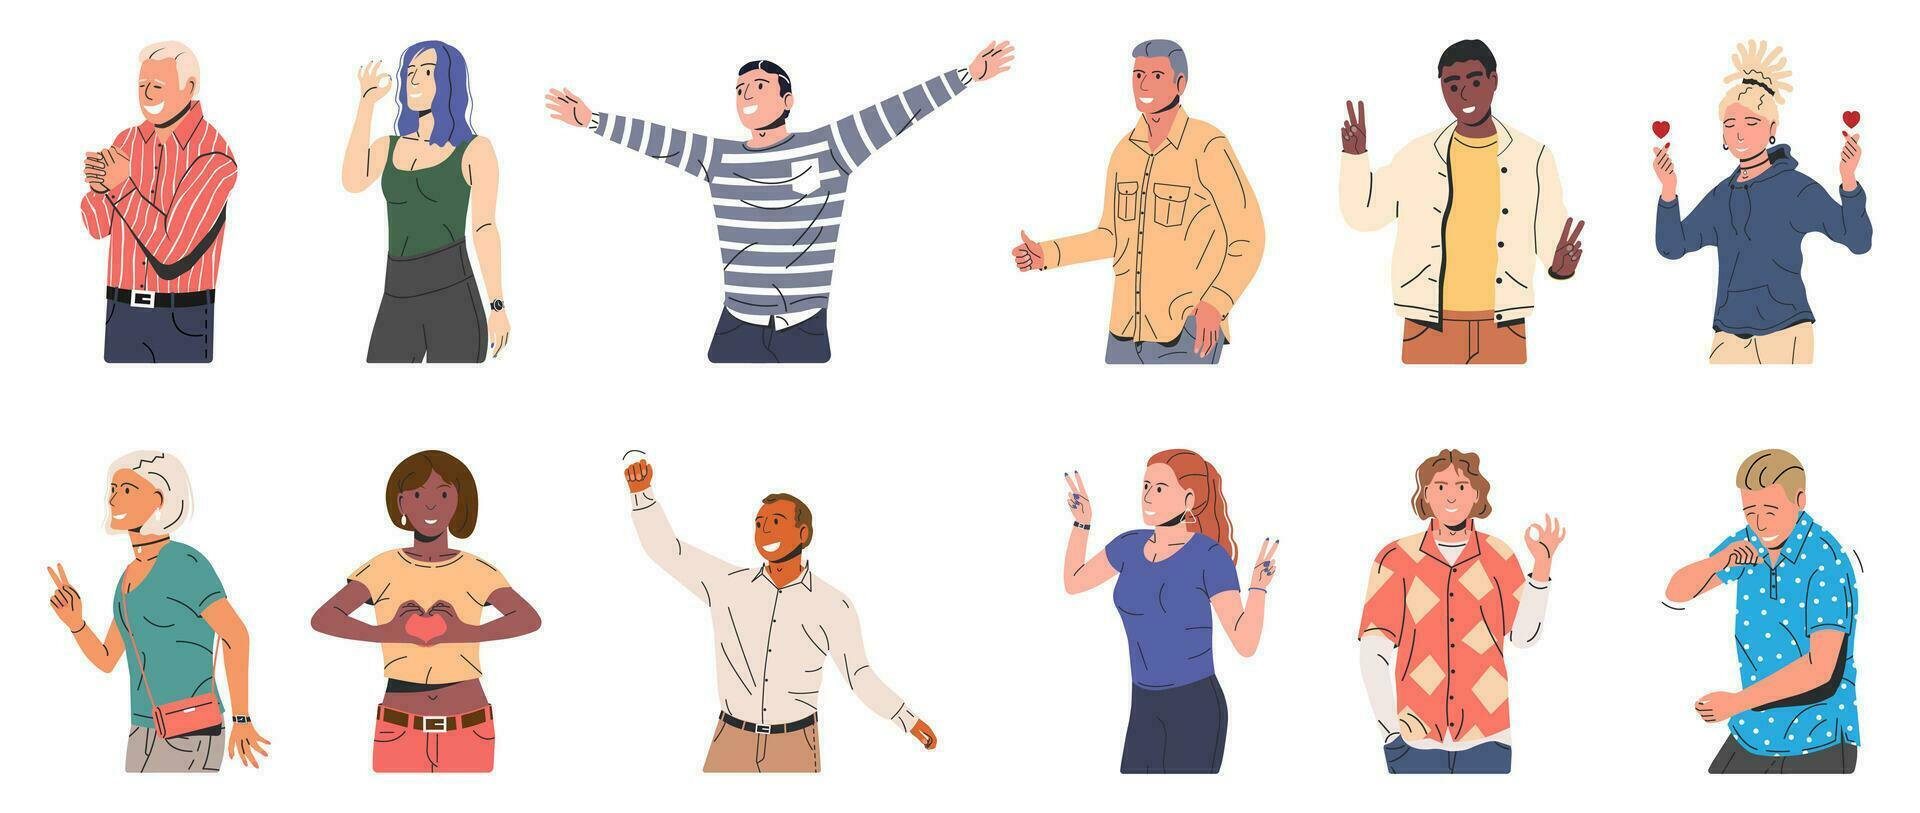 Set of Happiness Emotions Symbols. Various People Showing Positive Body Language Gestures. Woman and Man Show Victory, Heart, Love and Thumb Up Symbols. Happy People. Cartoon Flat Vector Illustration